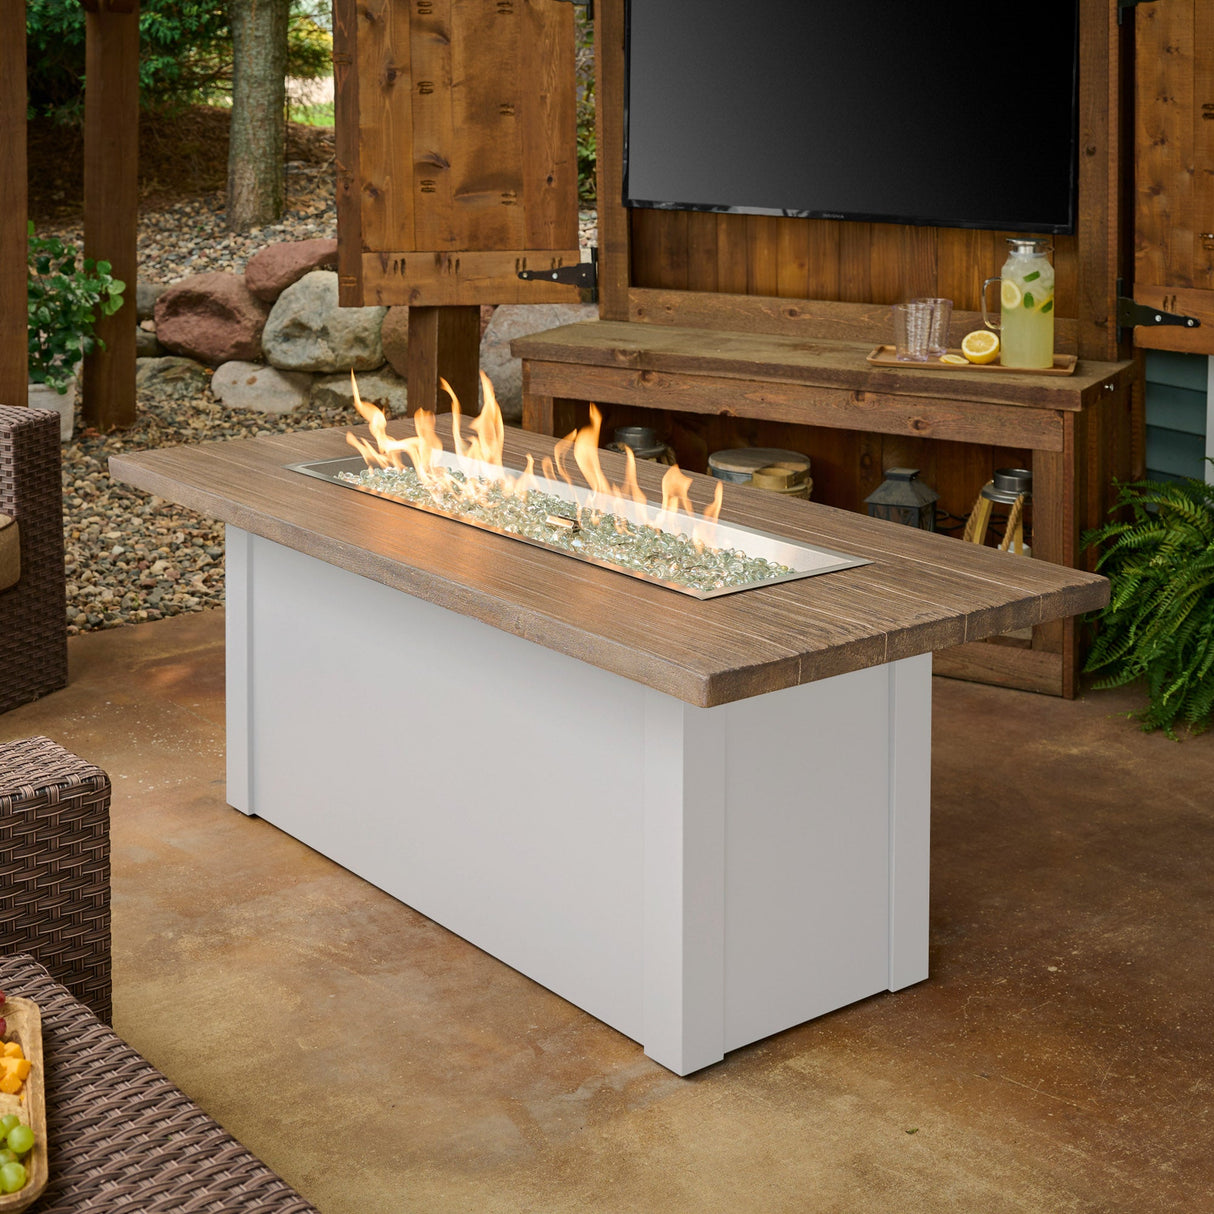 The Havenwood Linear Gas Fire Pit Table with a Driftwood top and White base in a cozy outdoor patio setting